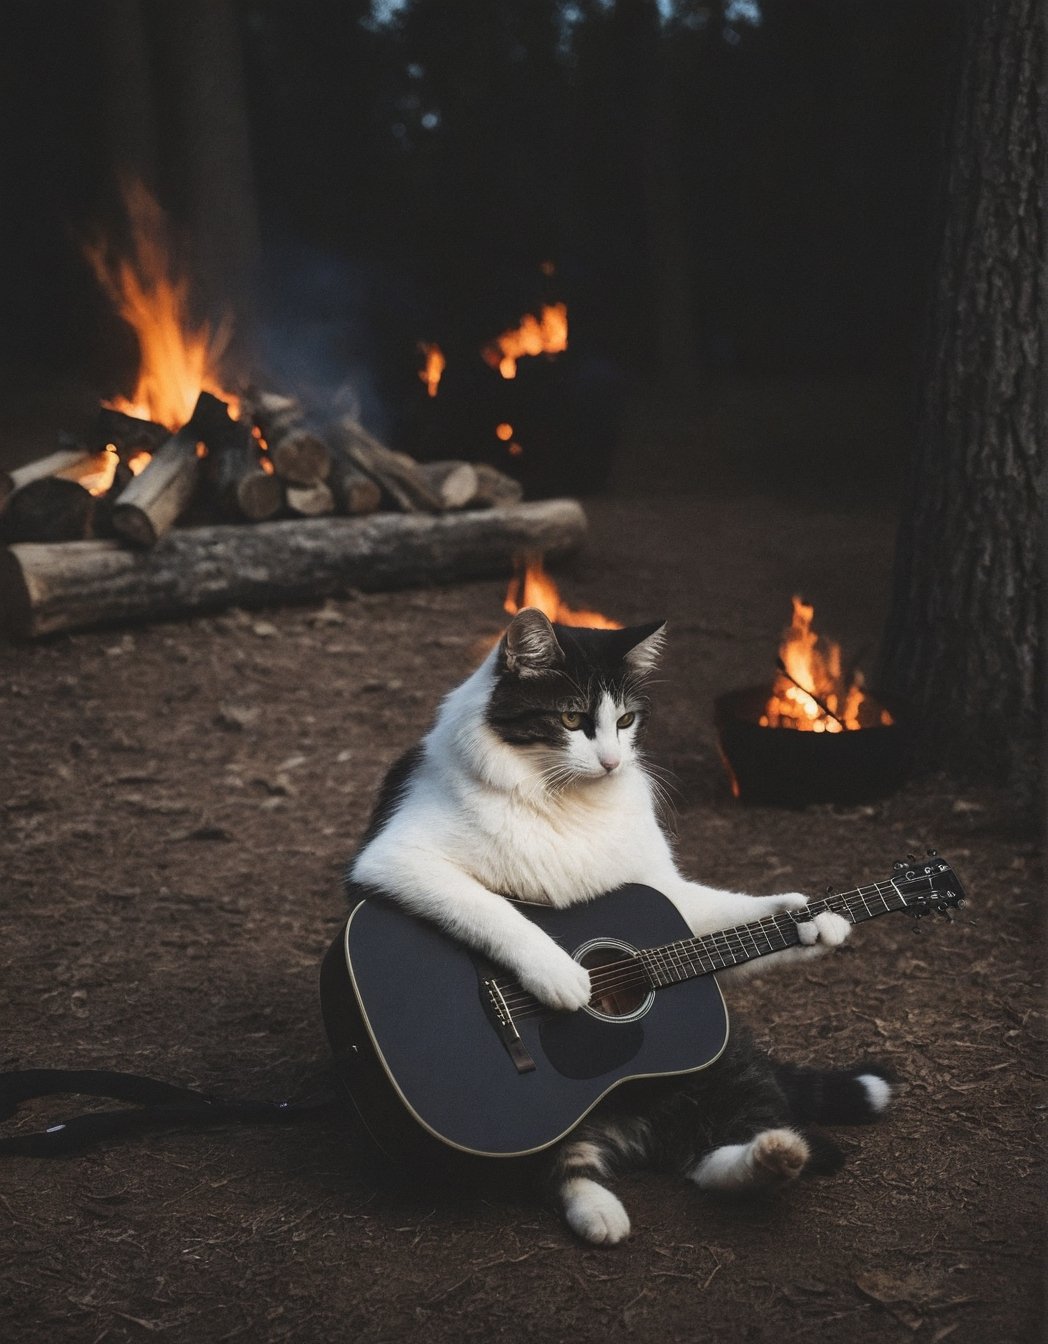 real photo of cat playing acoustic guitar at campfire